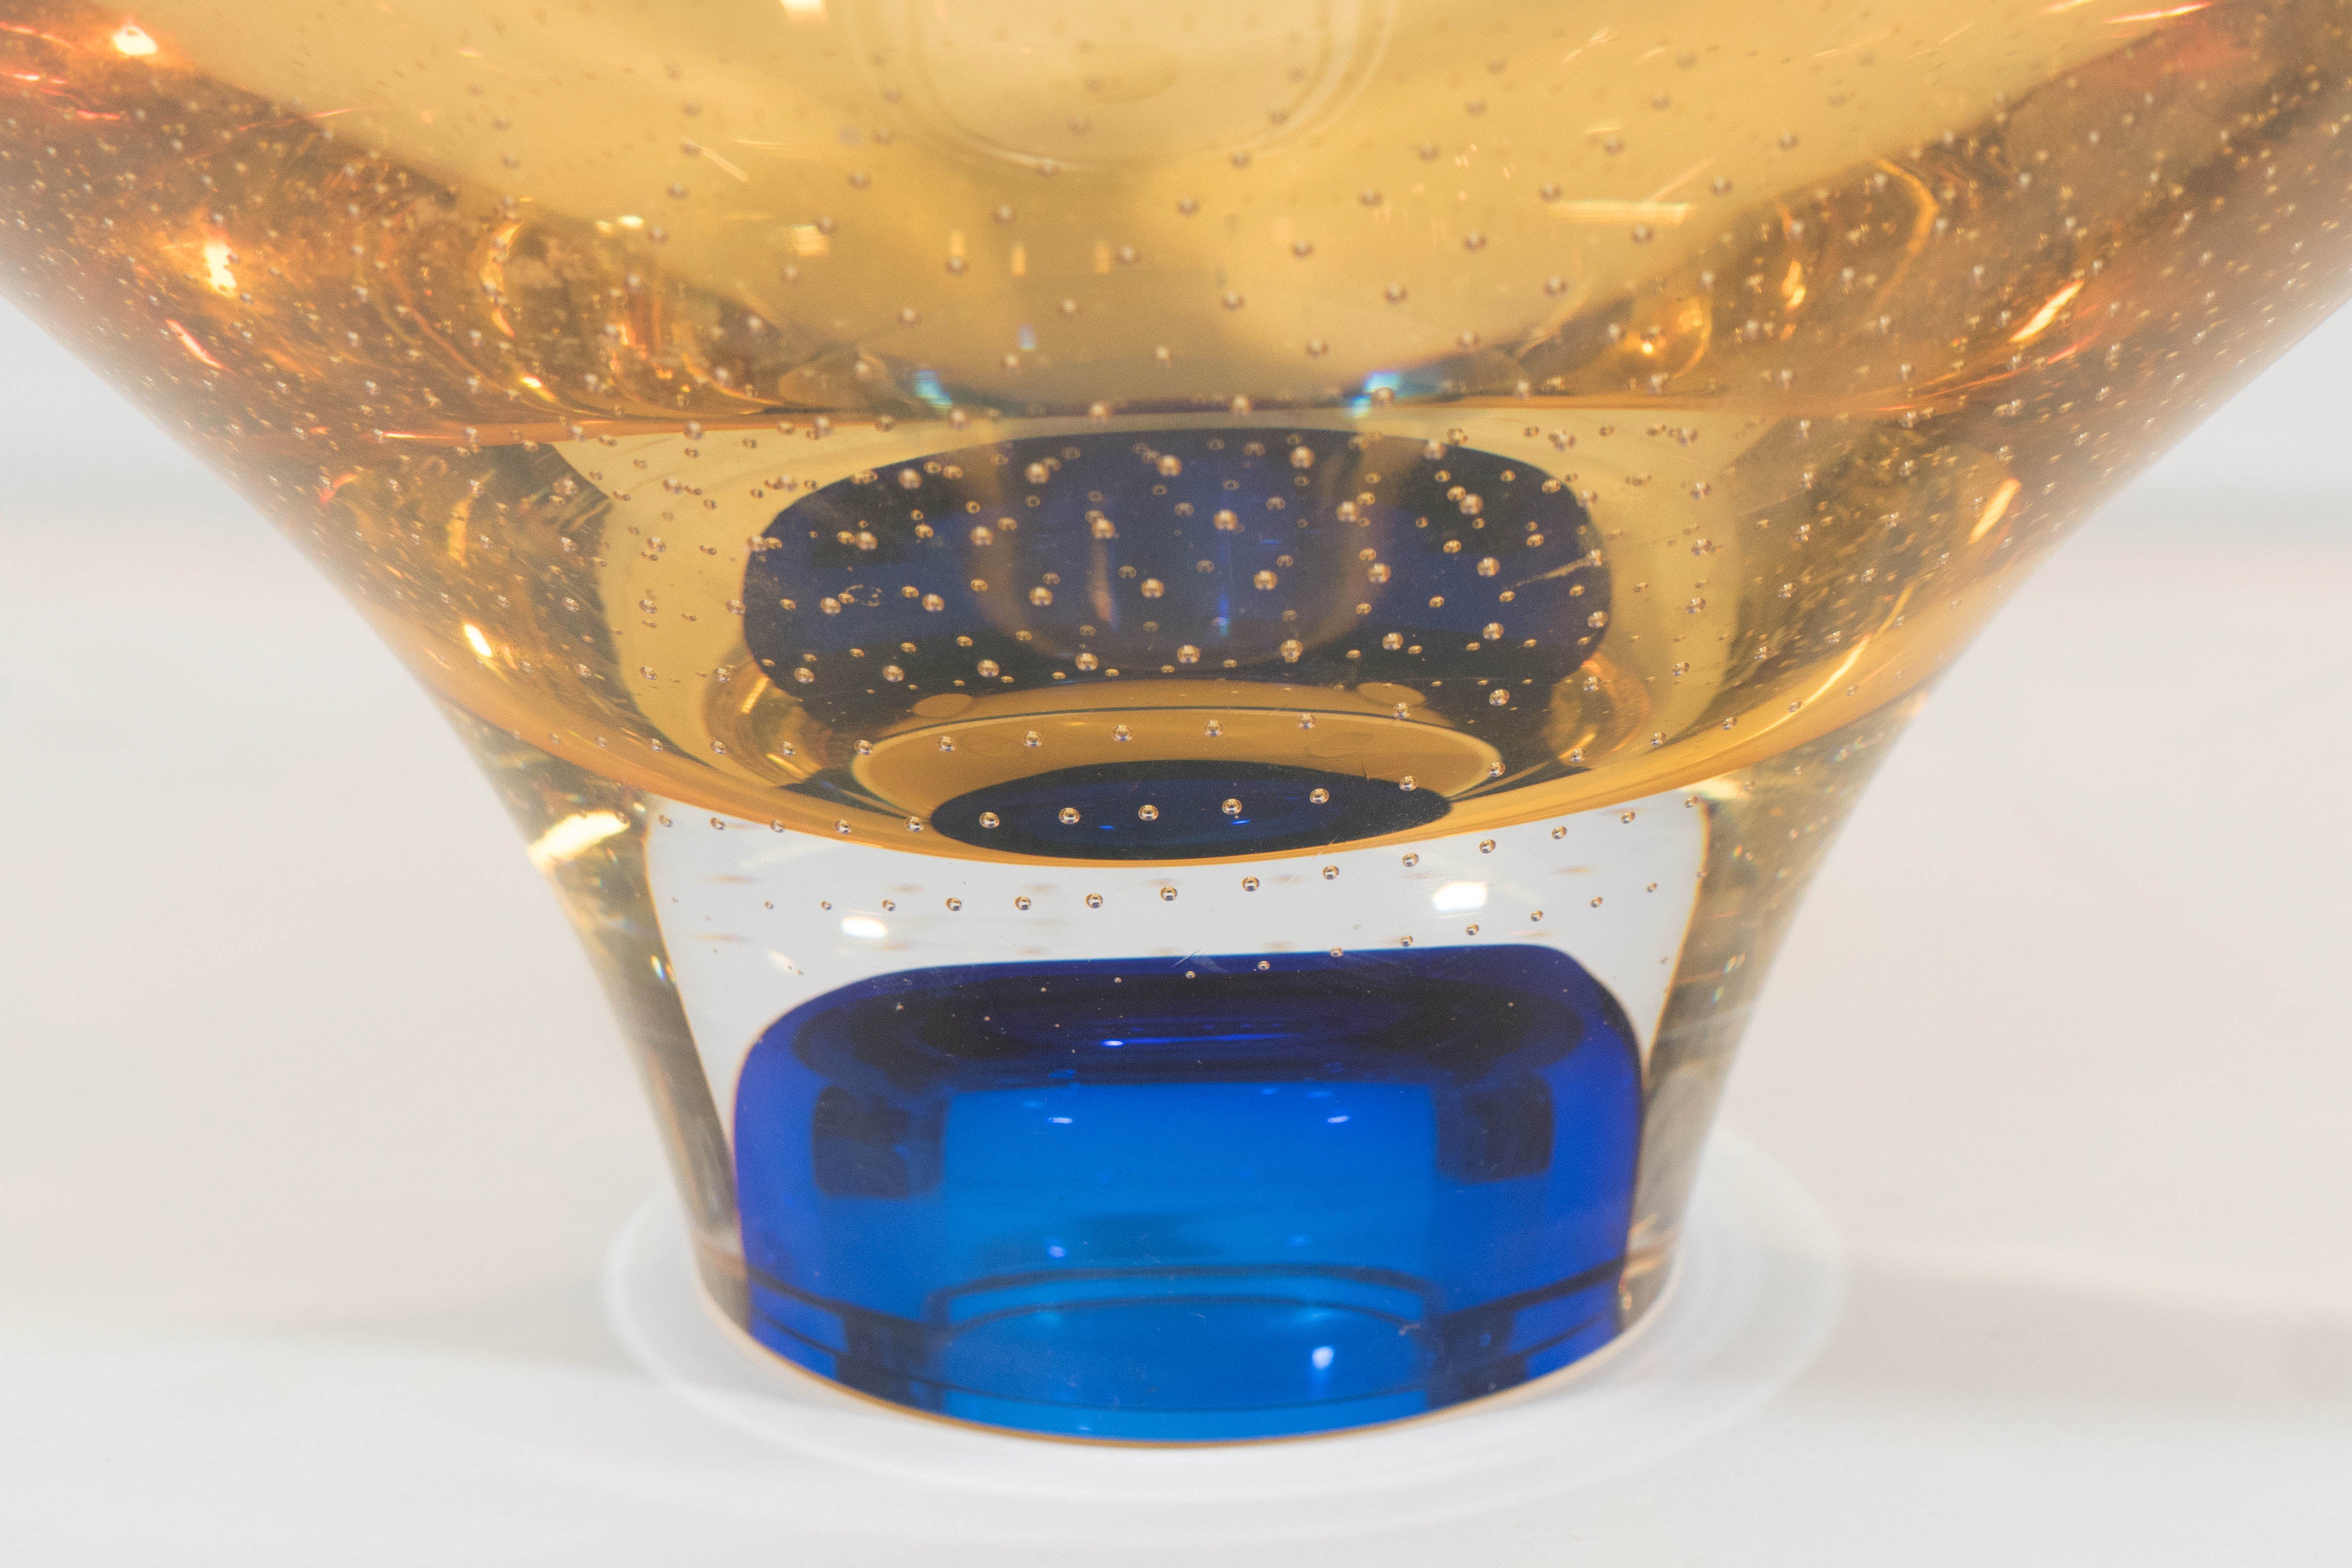 A decorative amber colored art glass bowl, with conical oval shape on cobalt base, with the inclusion of small controlled bubbles, by Swedish designer Göran Wärff, produced by Kosta Boda, Sweden. Markings include: inscription on the bottom ‘Kosta